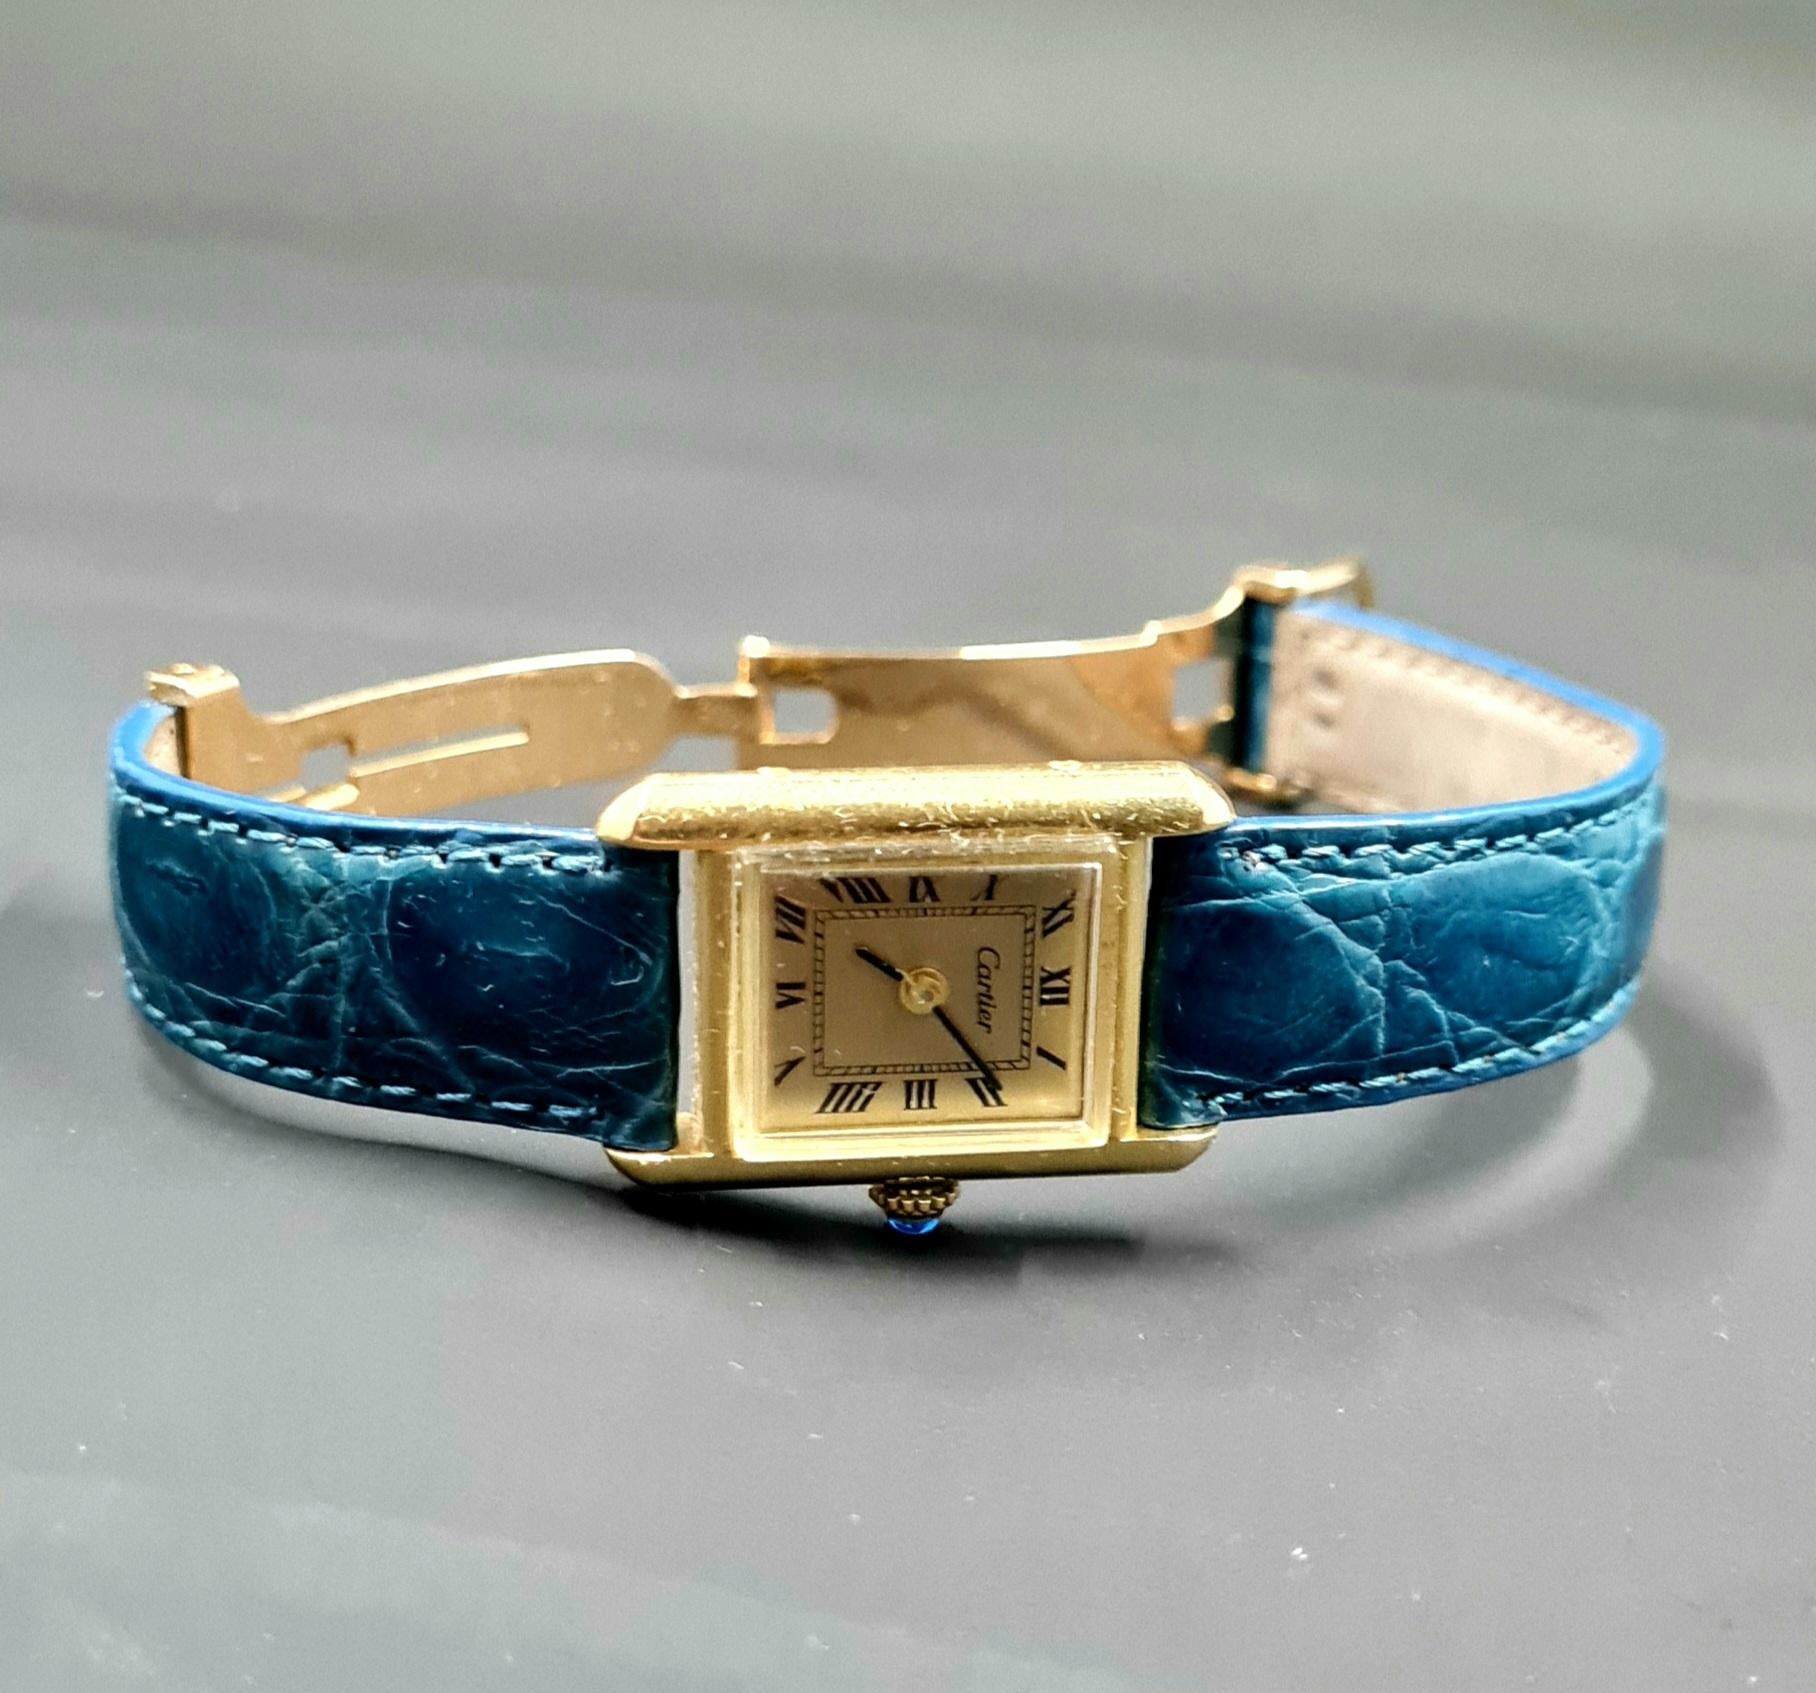 This watch was just serviced and running well. The watch is 20mm by 29mm and is a unisex watch, but is more suited for a ladies. The watch is all genuine Cartier, with an original Cartier movement, crown, stem, and case. The case is solid 18k gold